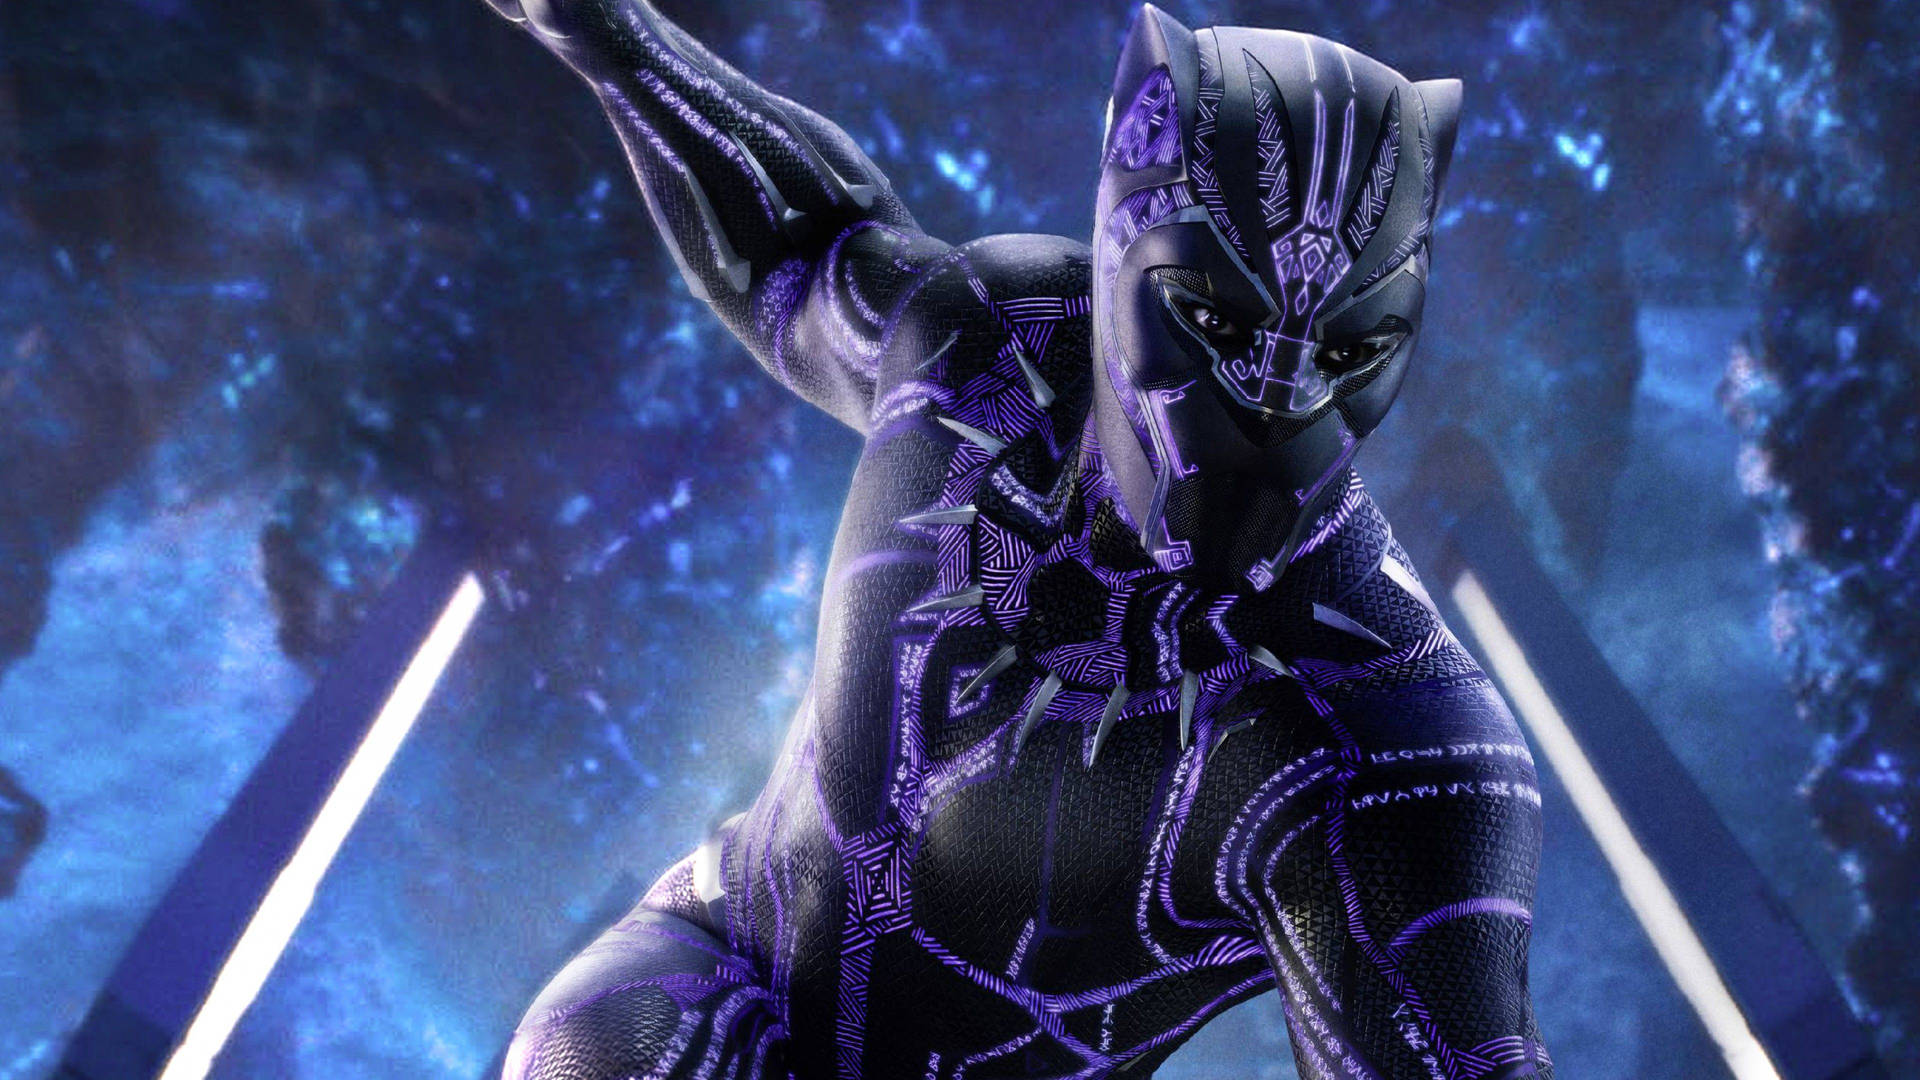 The Black Panther Ready to Protect and Serve Wallpaper